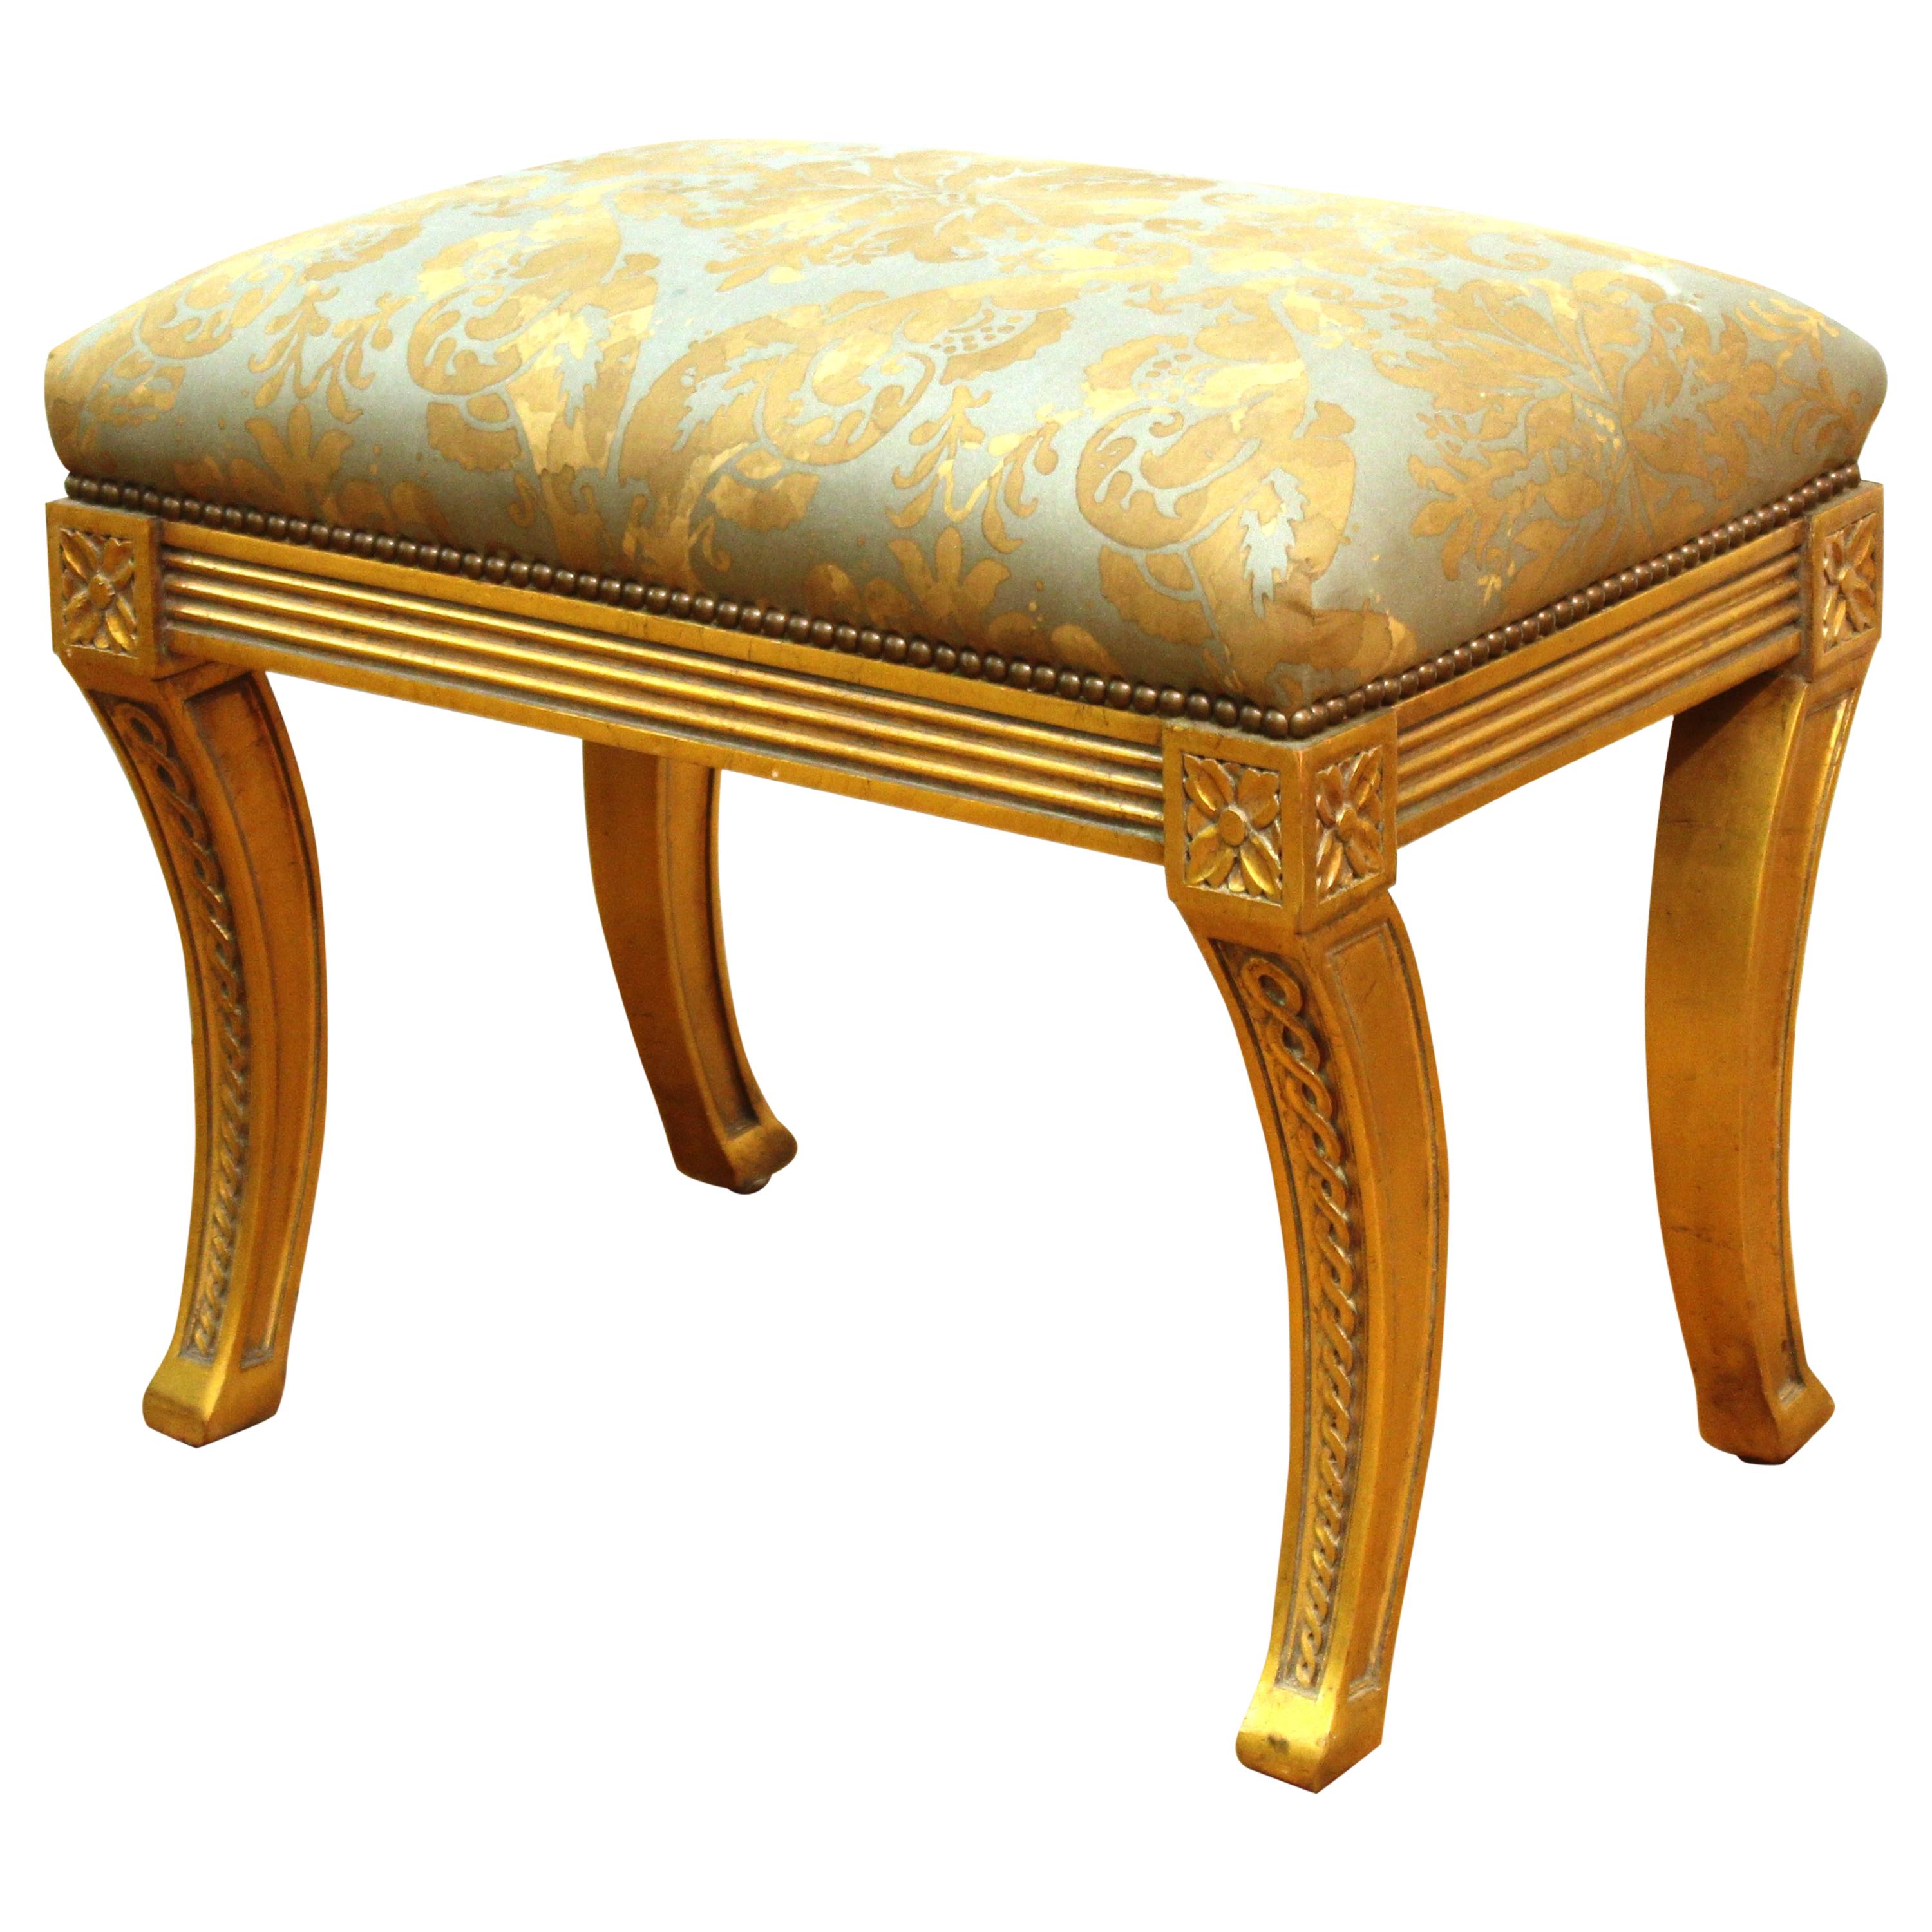 Neoclassical Revival Style Giltwood Bench